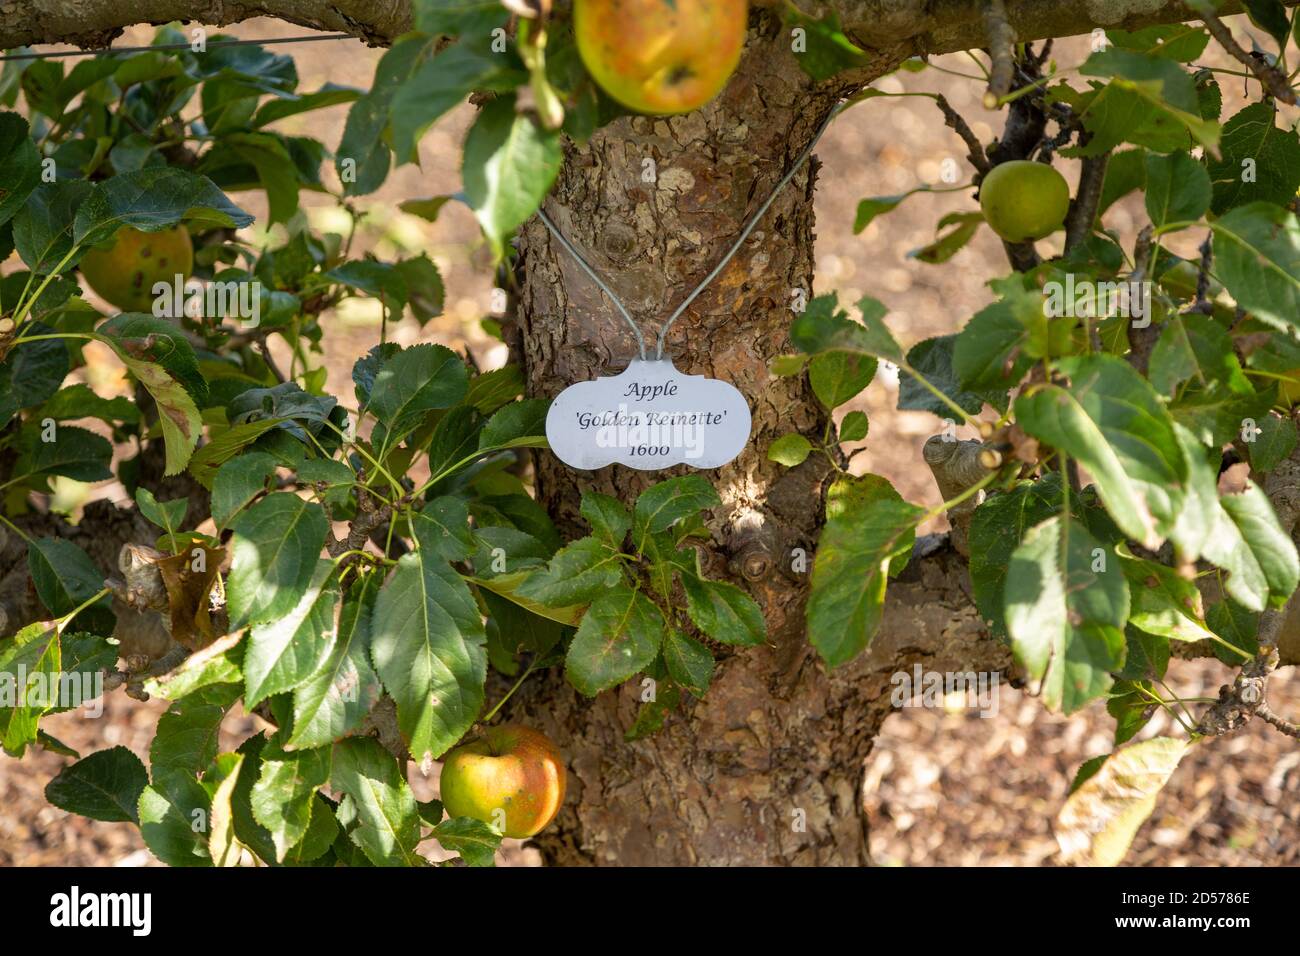 Apple variety Golden Reinette from 1600 in the walled organic Kitchen Garden, Audley End House, Essex, England, UK Stock Photo